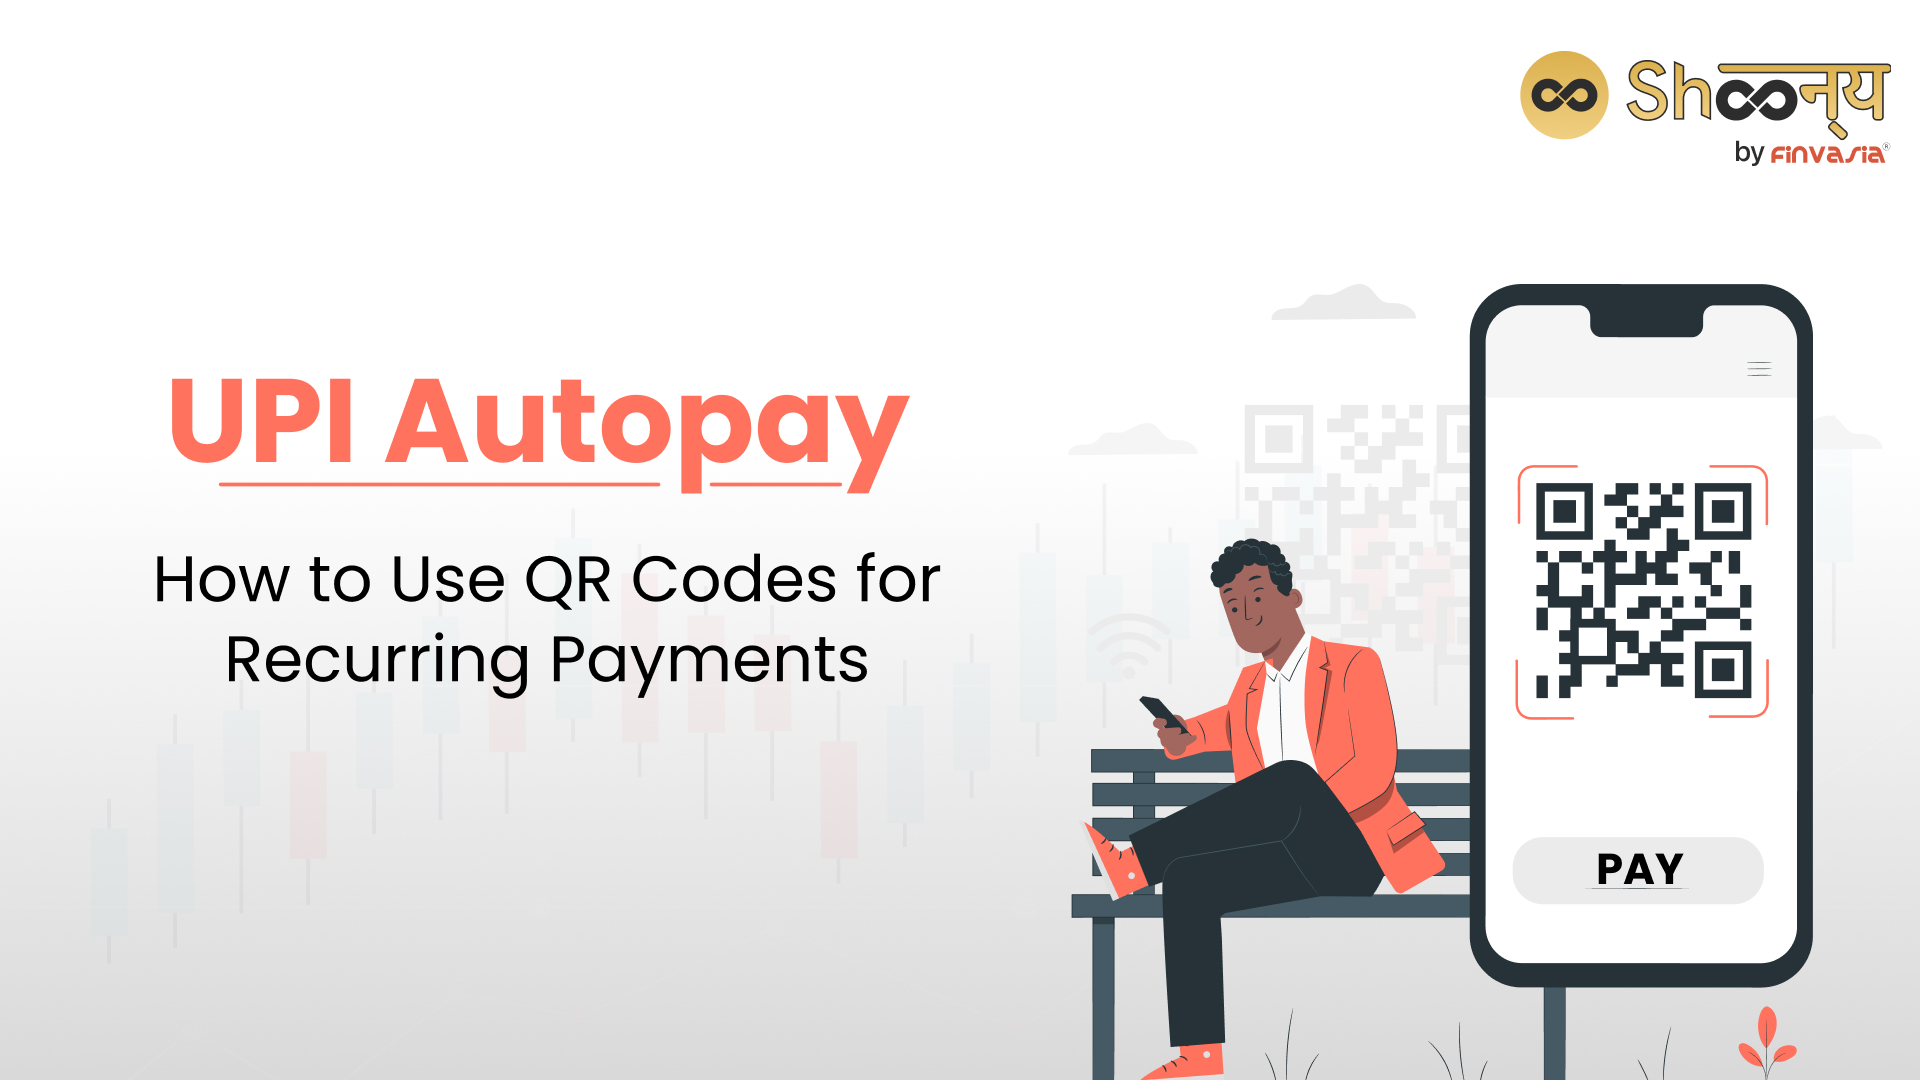 UPI AutoPay: Simplifying Recurring Payments with QR Codes